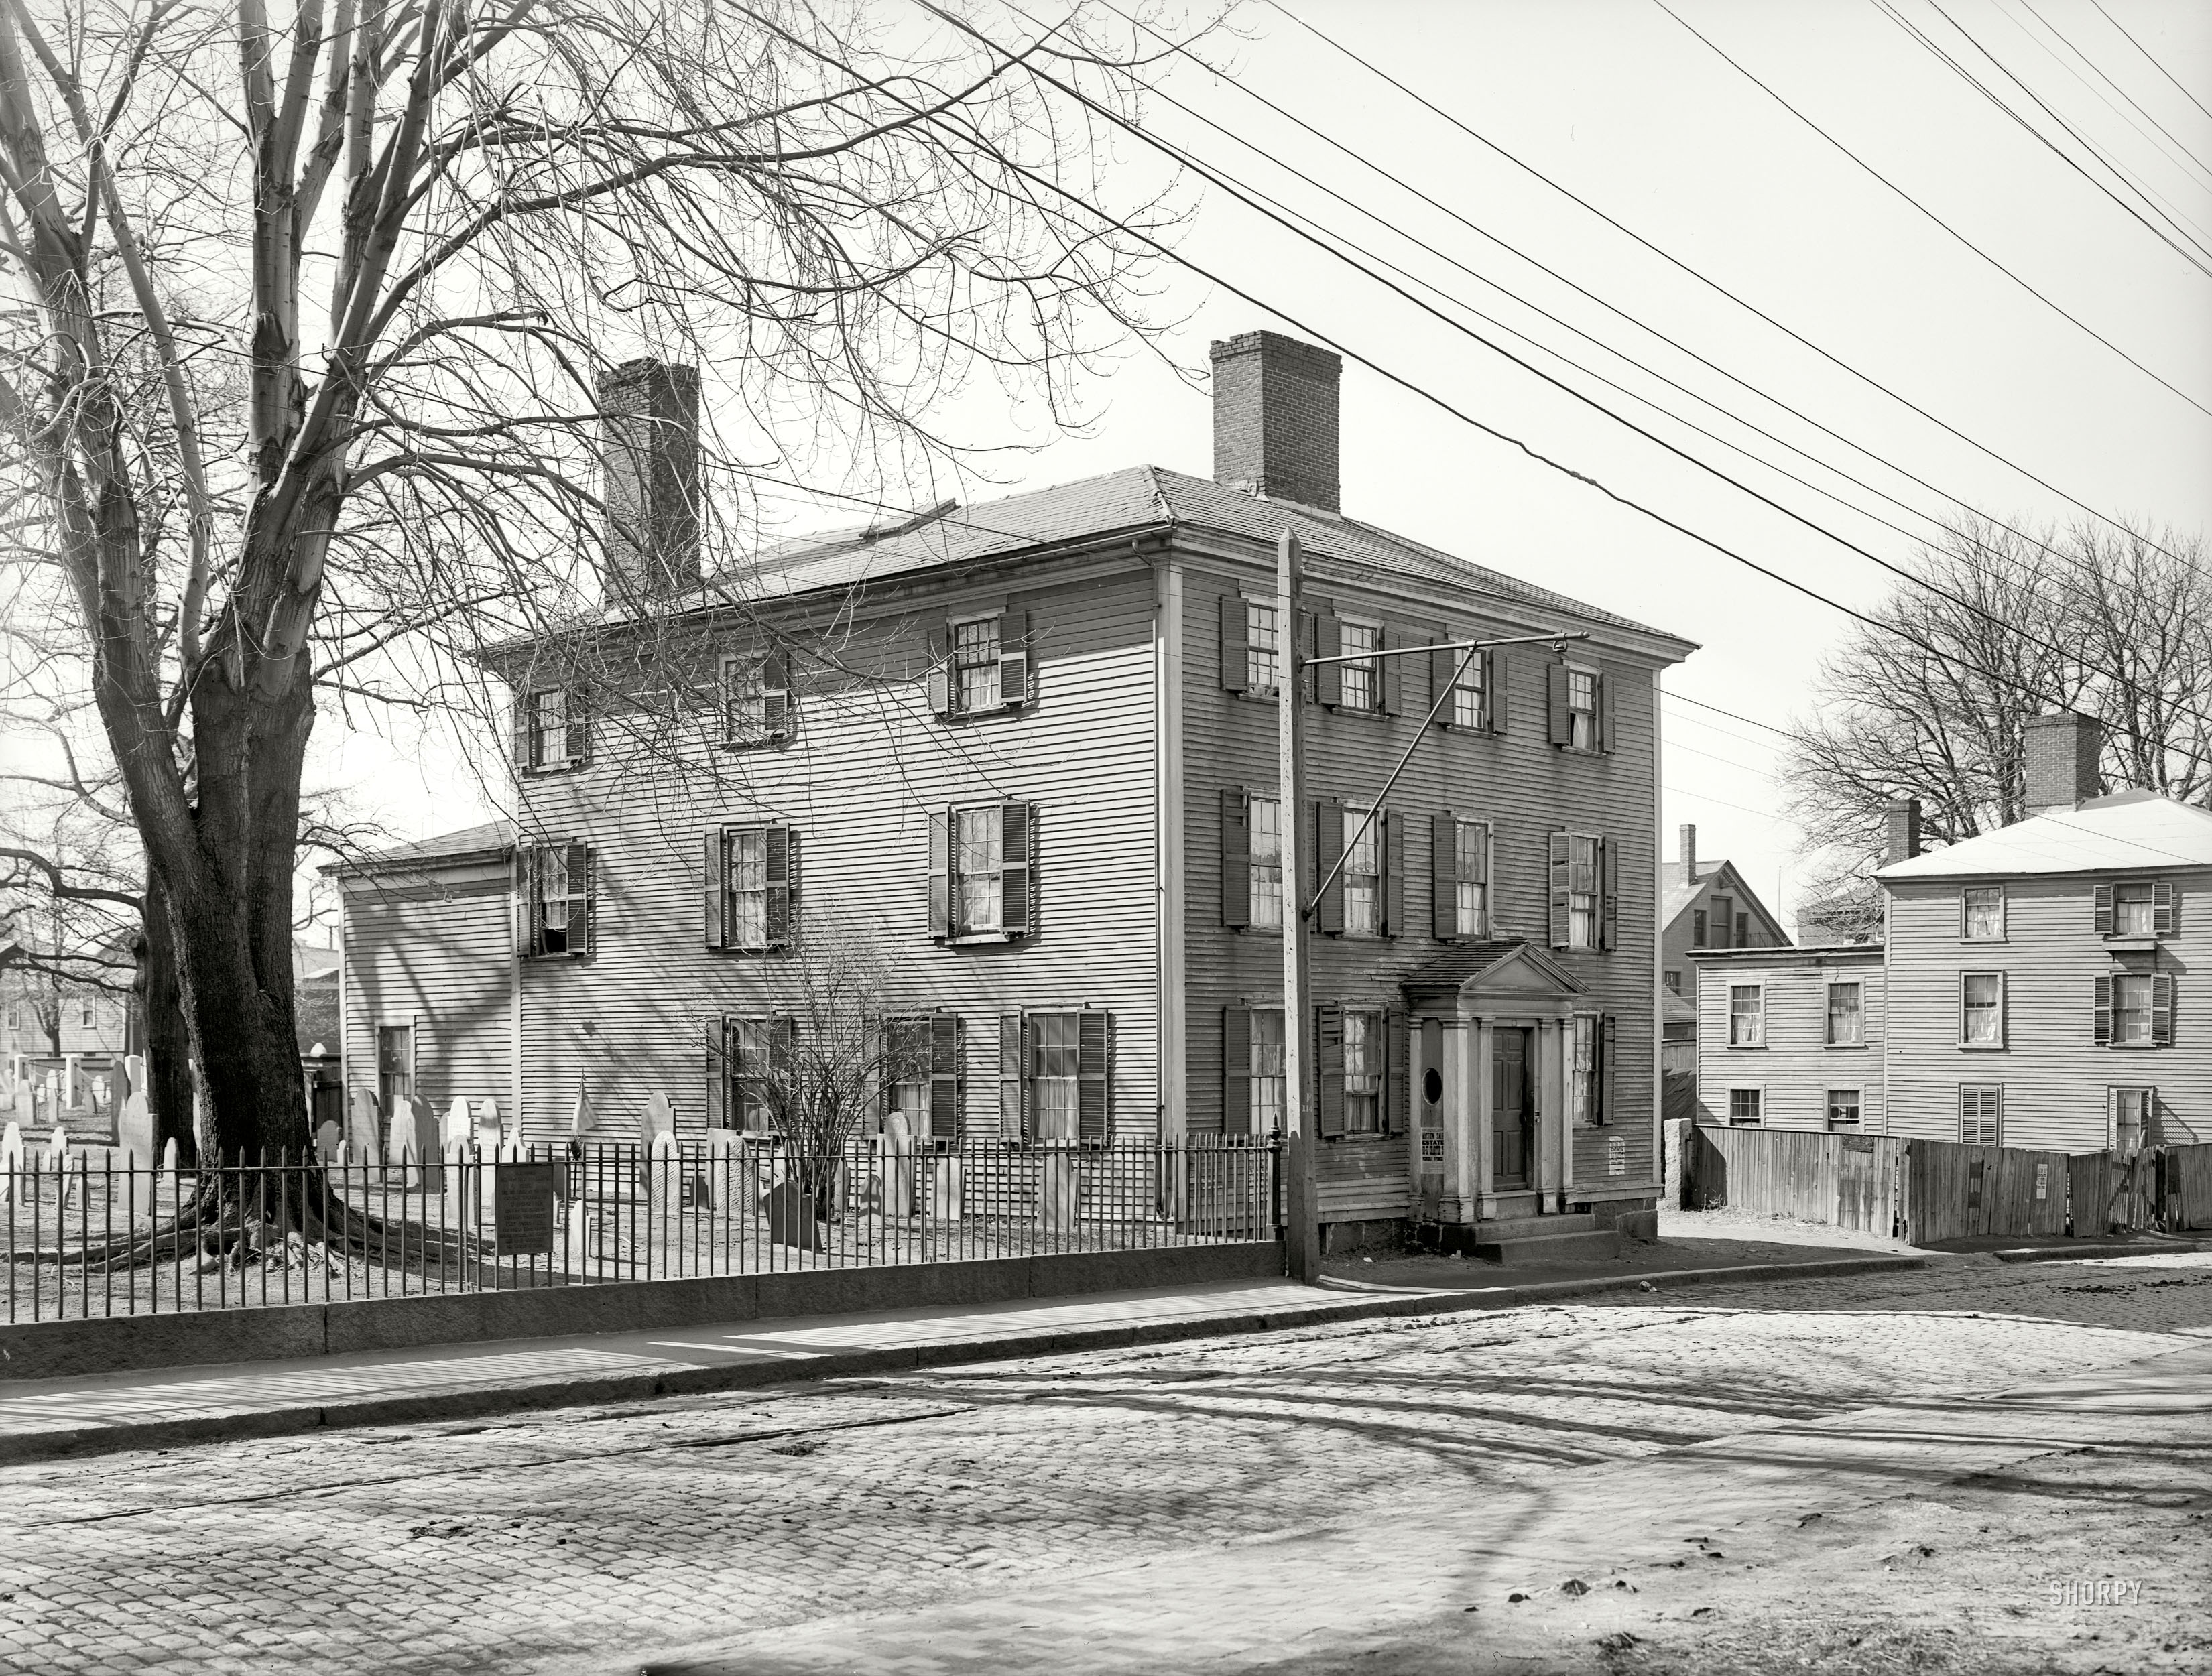 Salem, Massachusetts, circa 1906. "The Grimshawe House." A pleasant street where the neighbors are quiet and have deep roots in the community. 6½ x 8½ inch dry plate glass negative, Detroit Publishing Company. View full size.